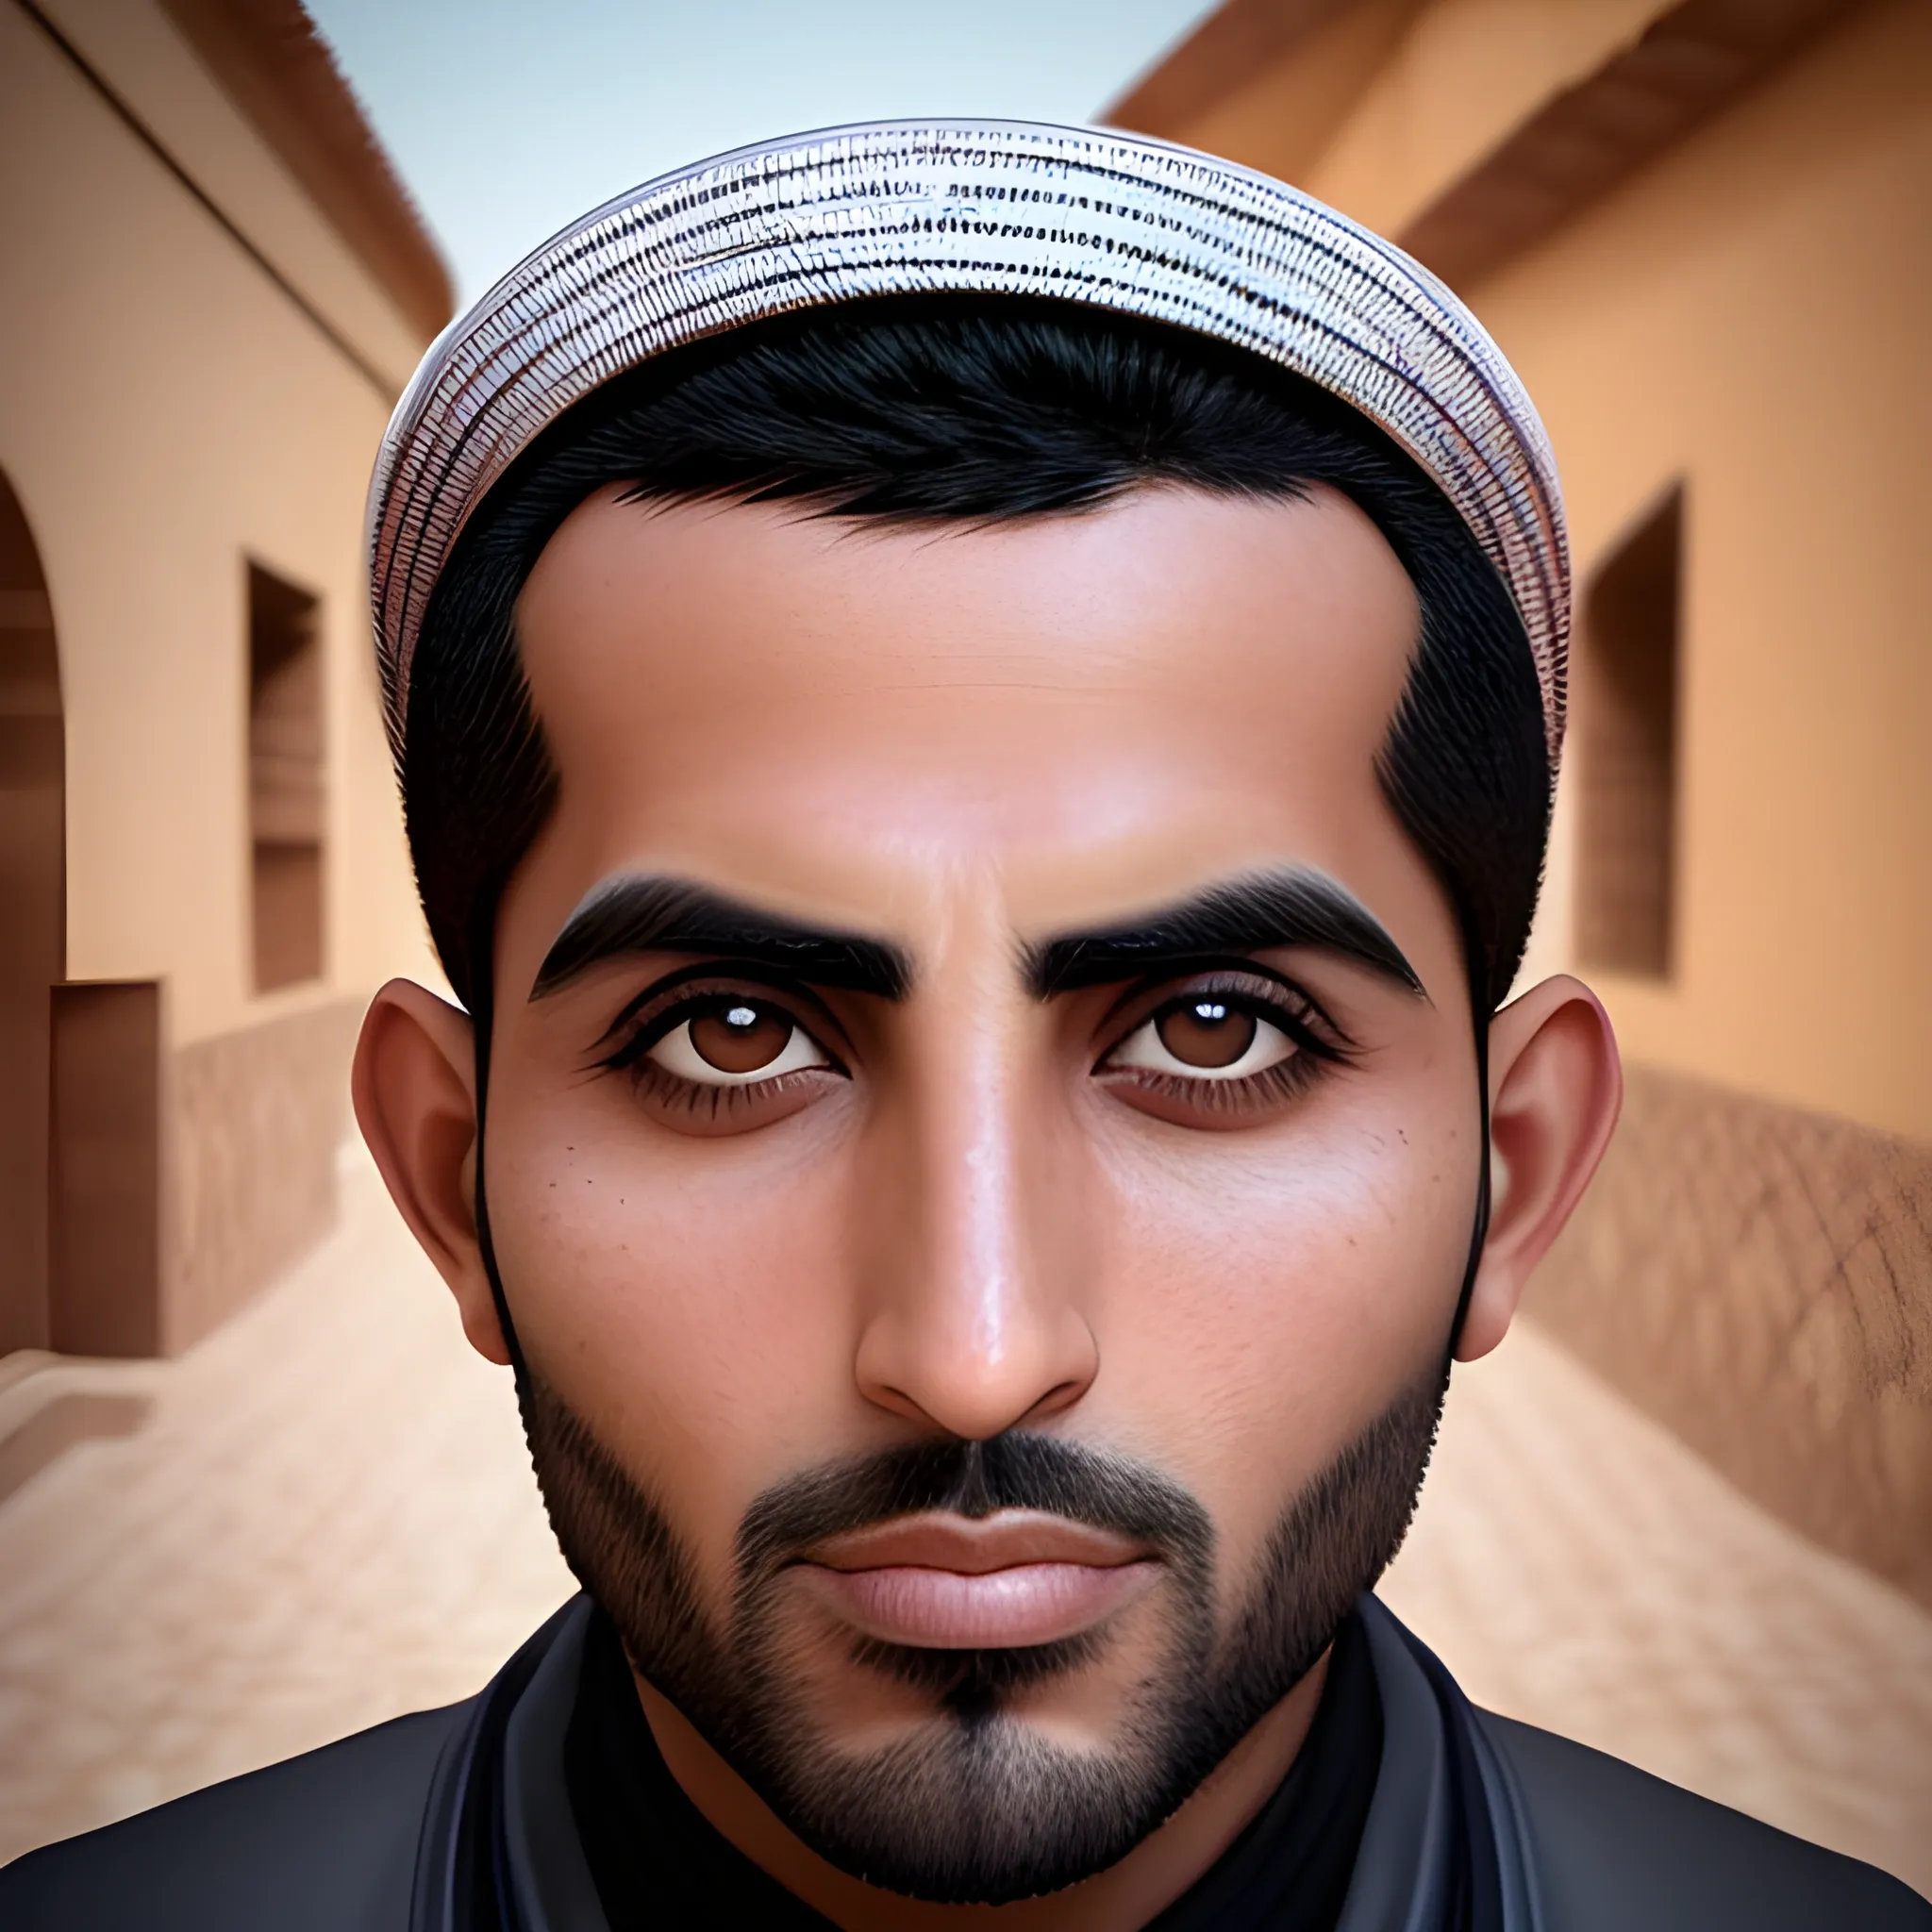 handsome Moroccan 30 years old man, big eyes, short hair, extreme picture quality, ambient light, exquisite facial features, 3D